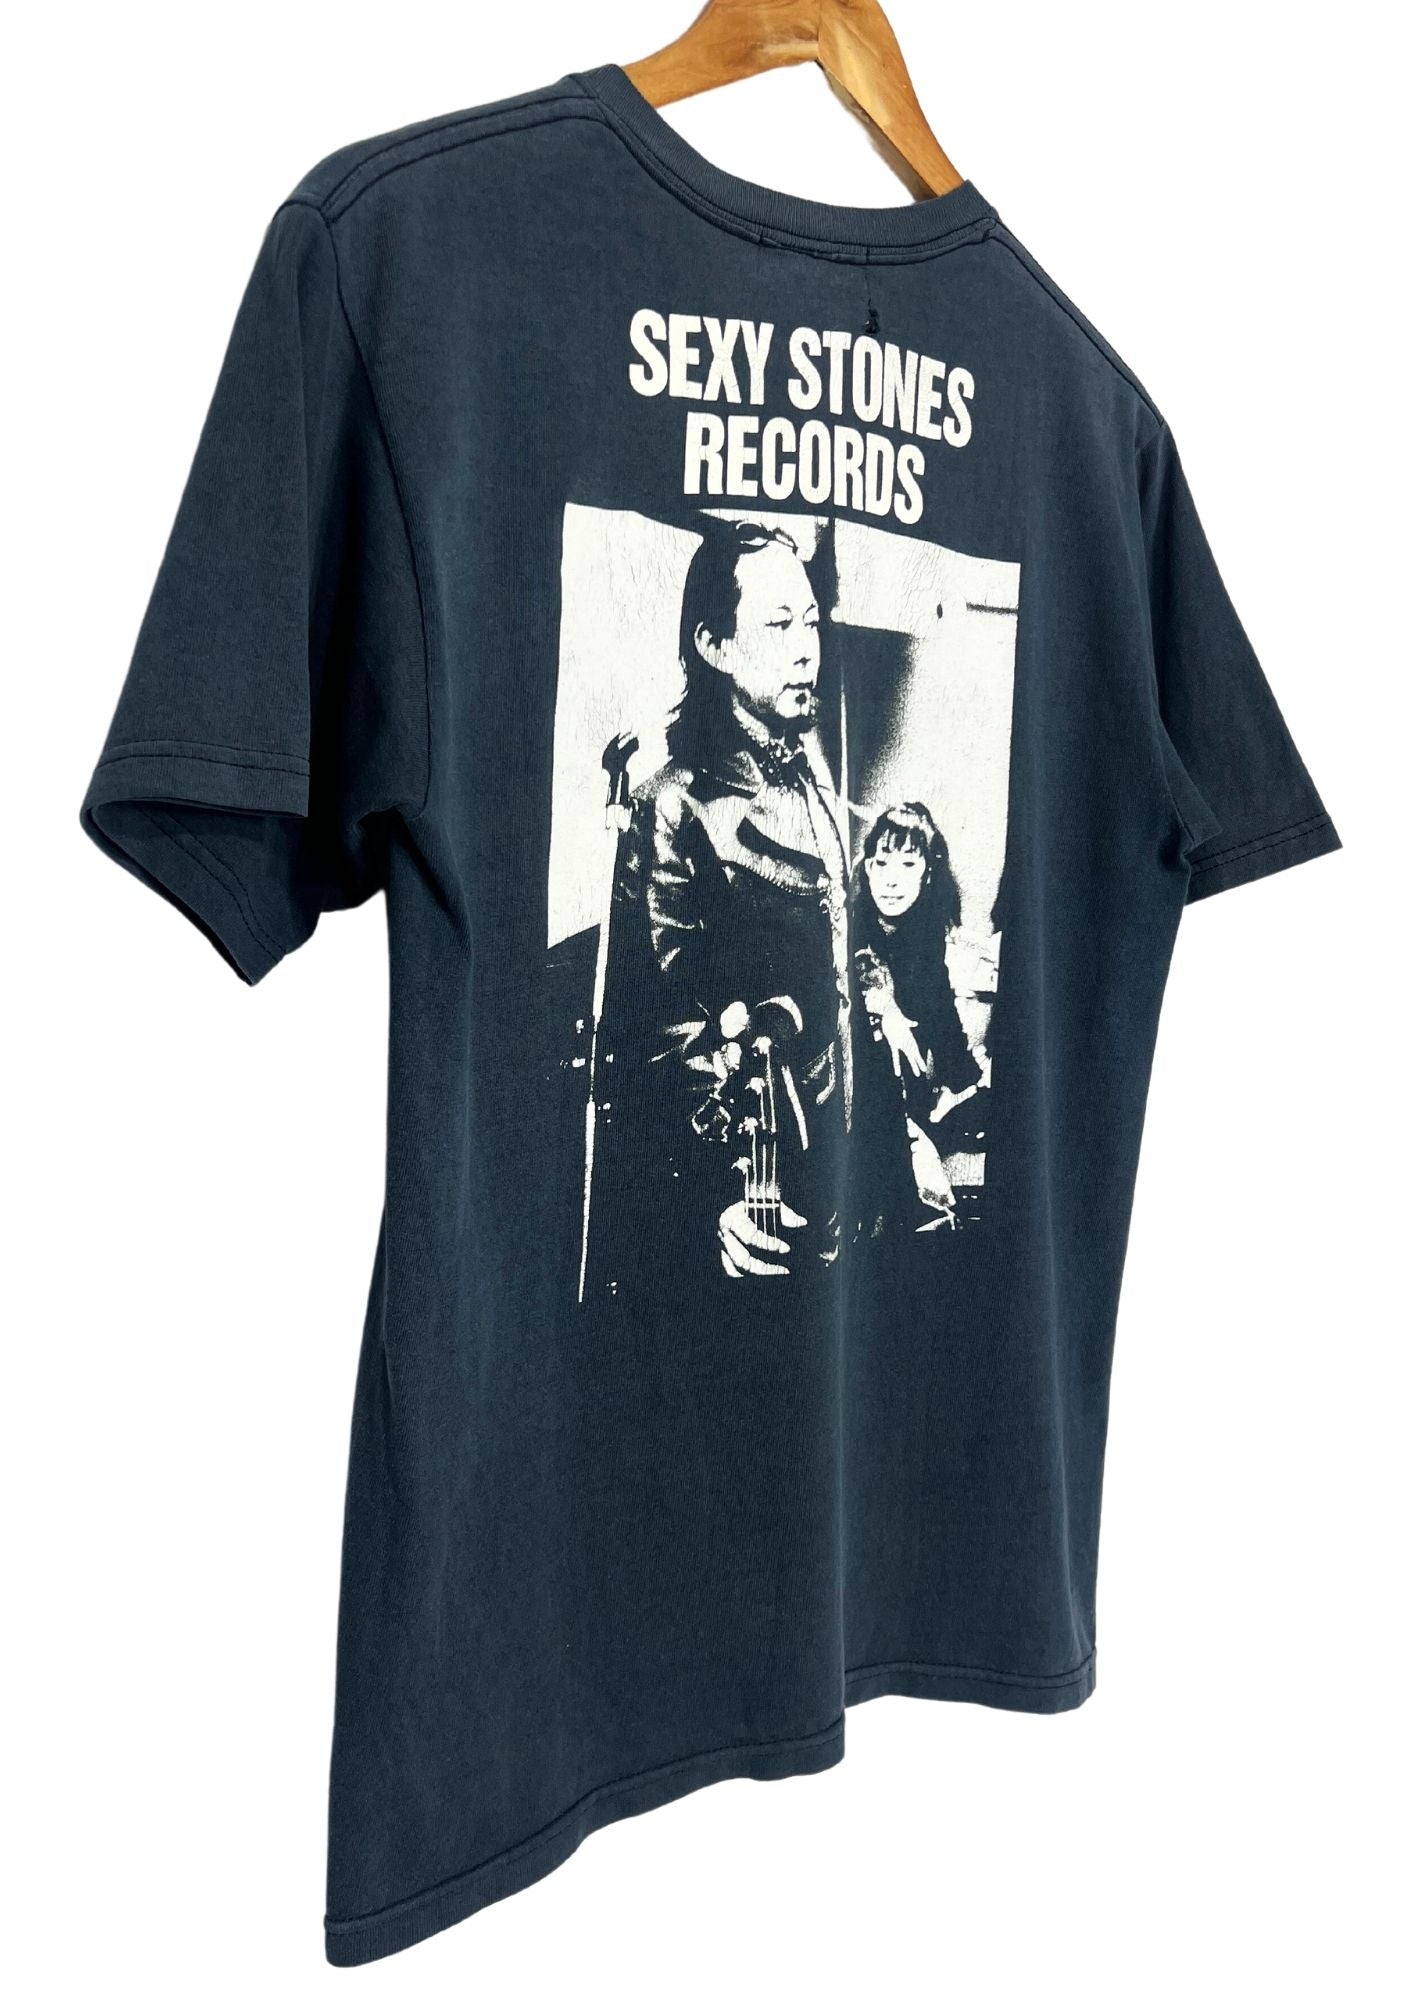 2000 SHERBETS 'Sexy Stones Records' Japanese Band T-shirt